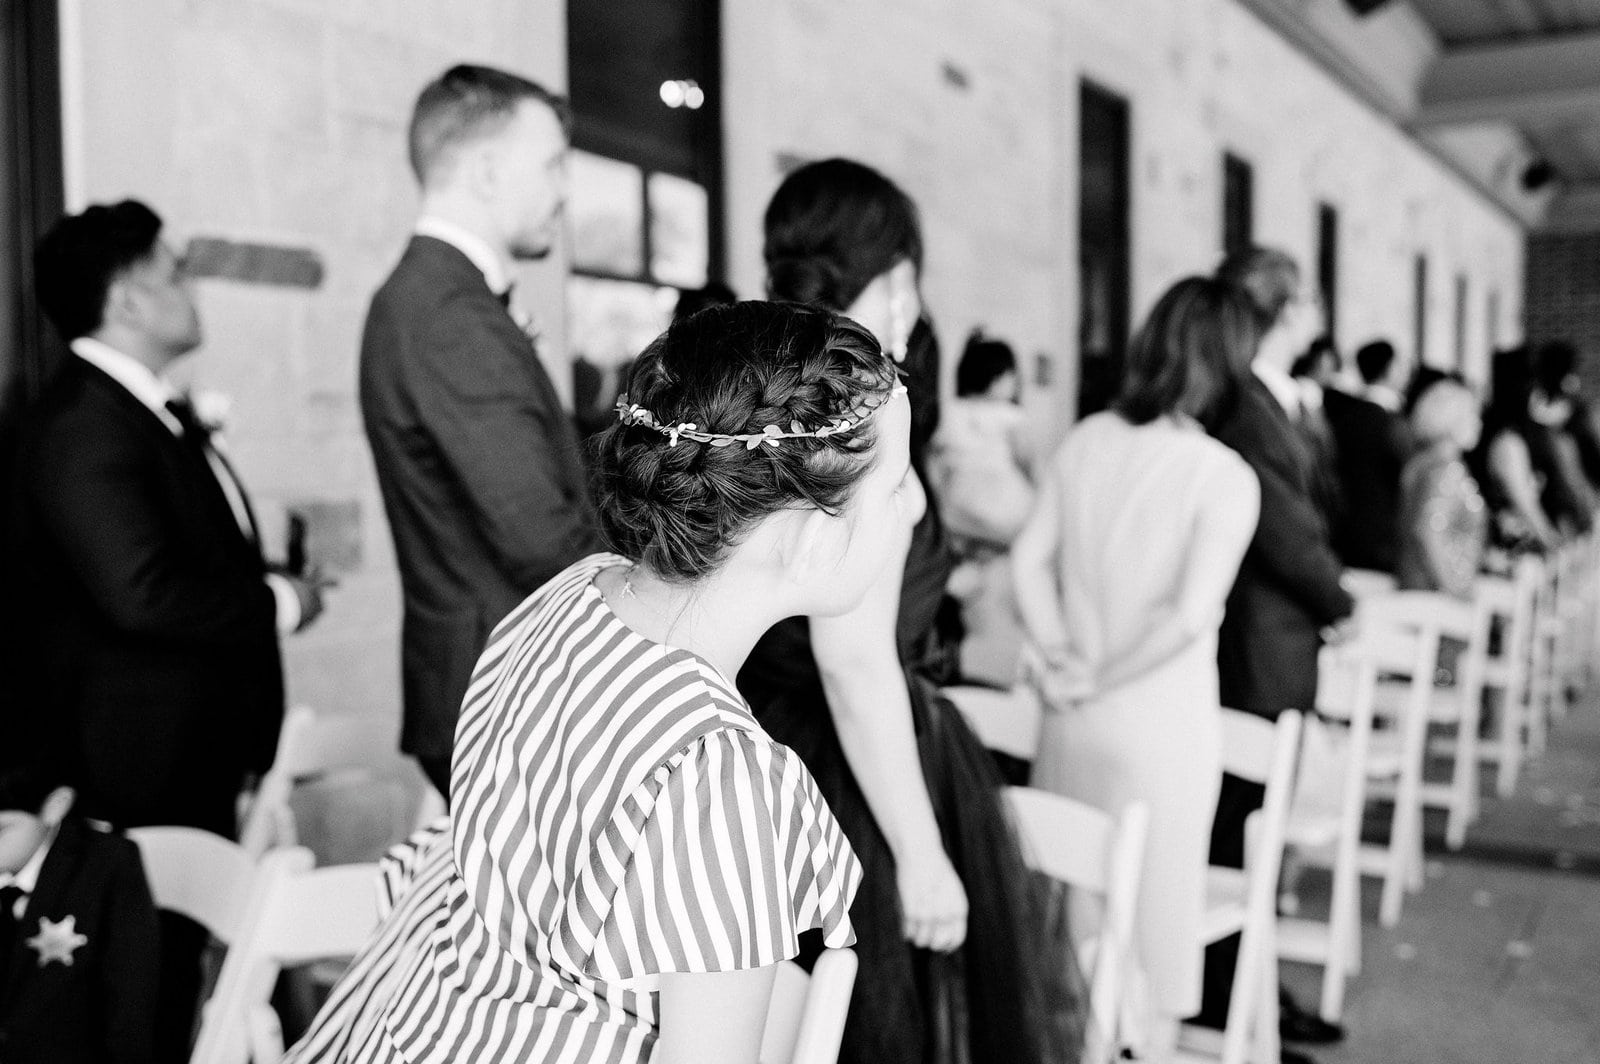 Guests Excited to see Bride at Wedding Ceremony Sunny Toronto, Summer Intimate Elopement Jacqueline James Photography